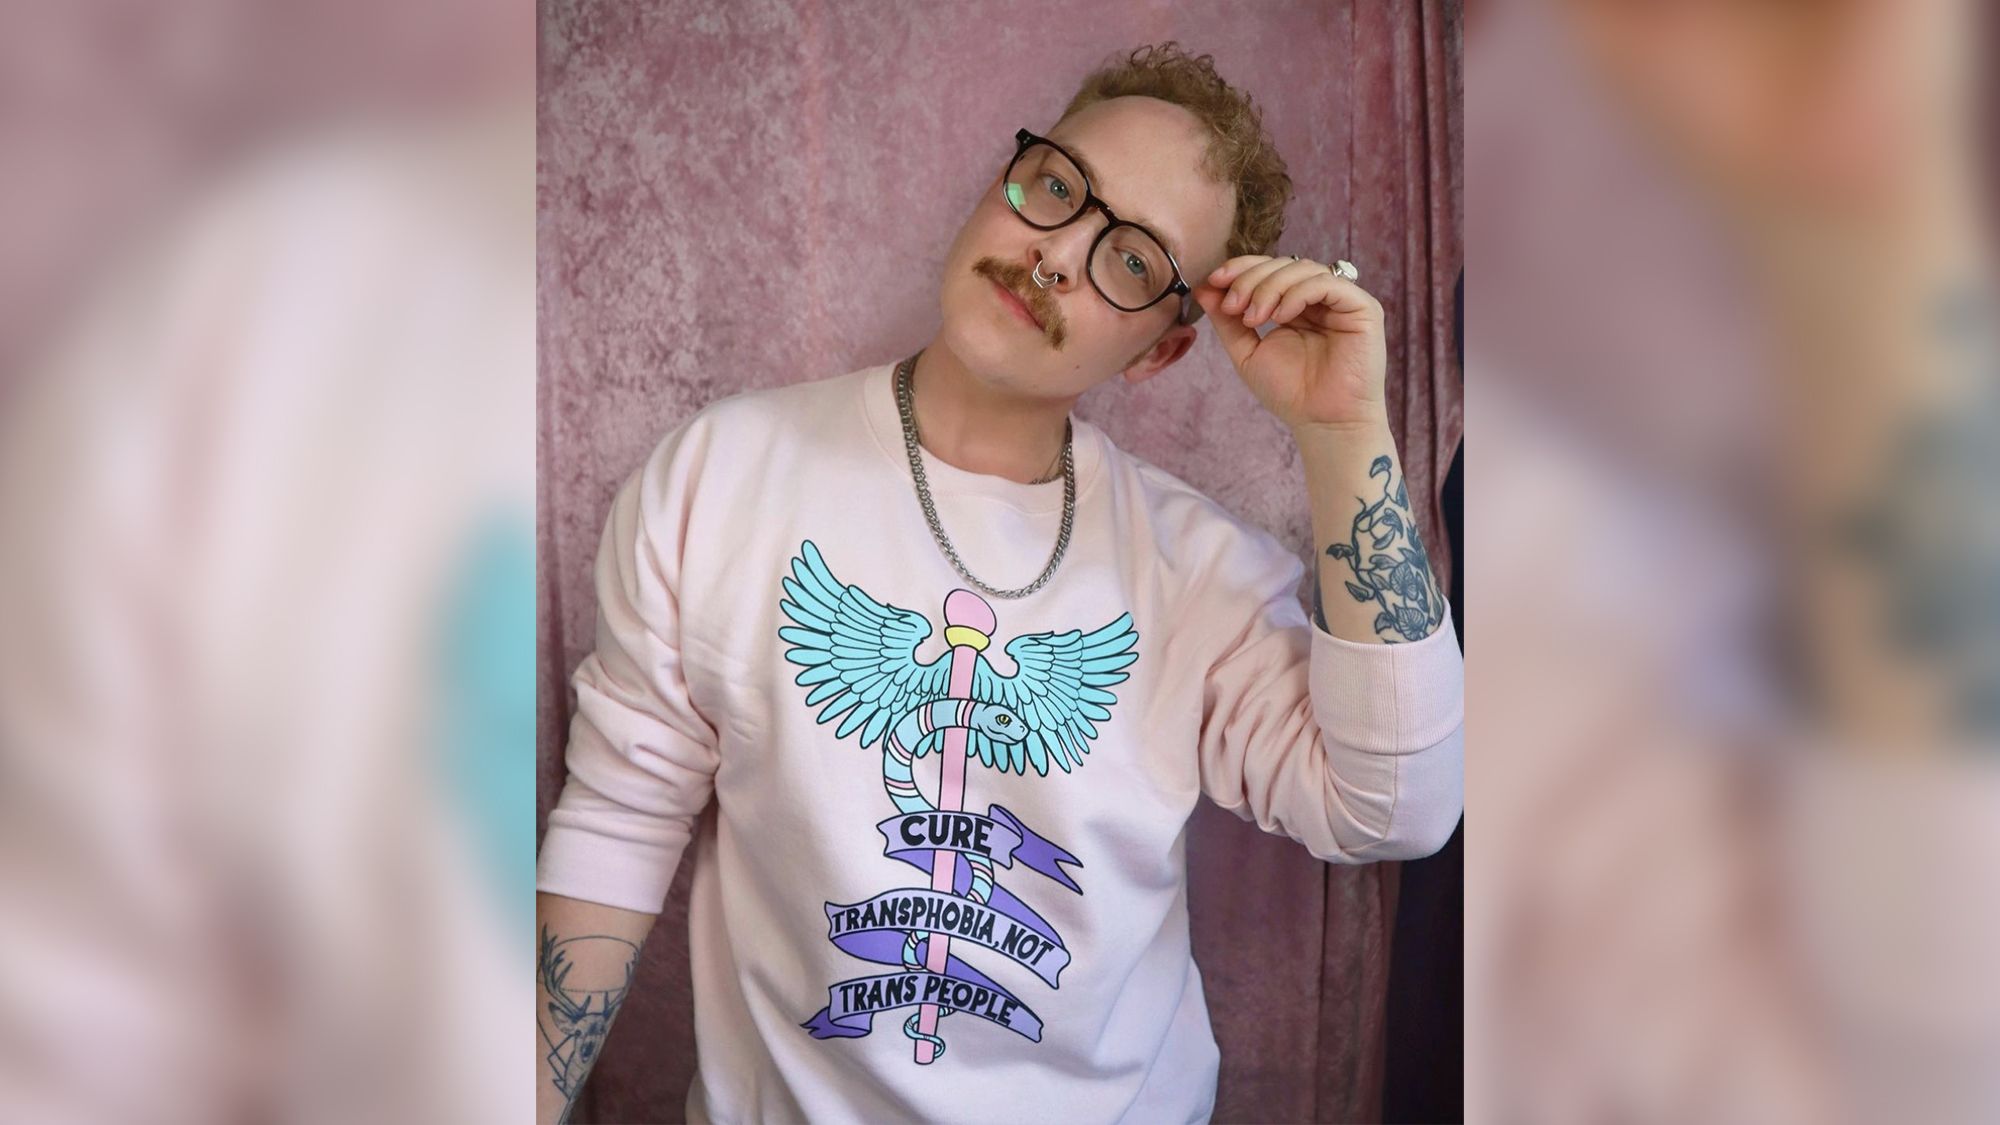 LGBTQ+ brand creator 'relieved' after Target pulls his items off